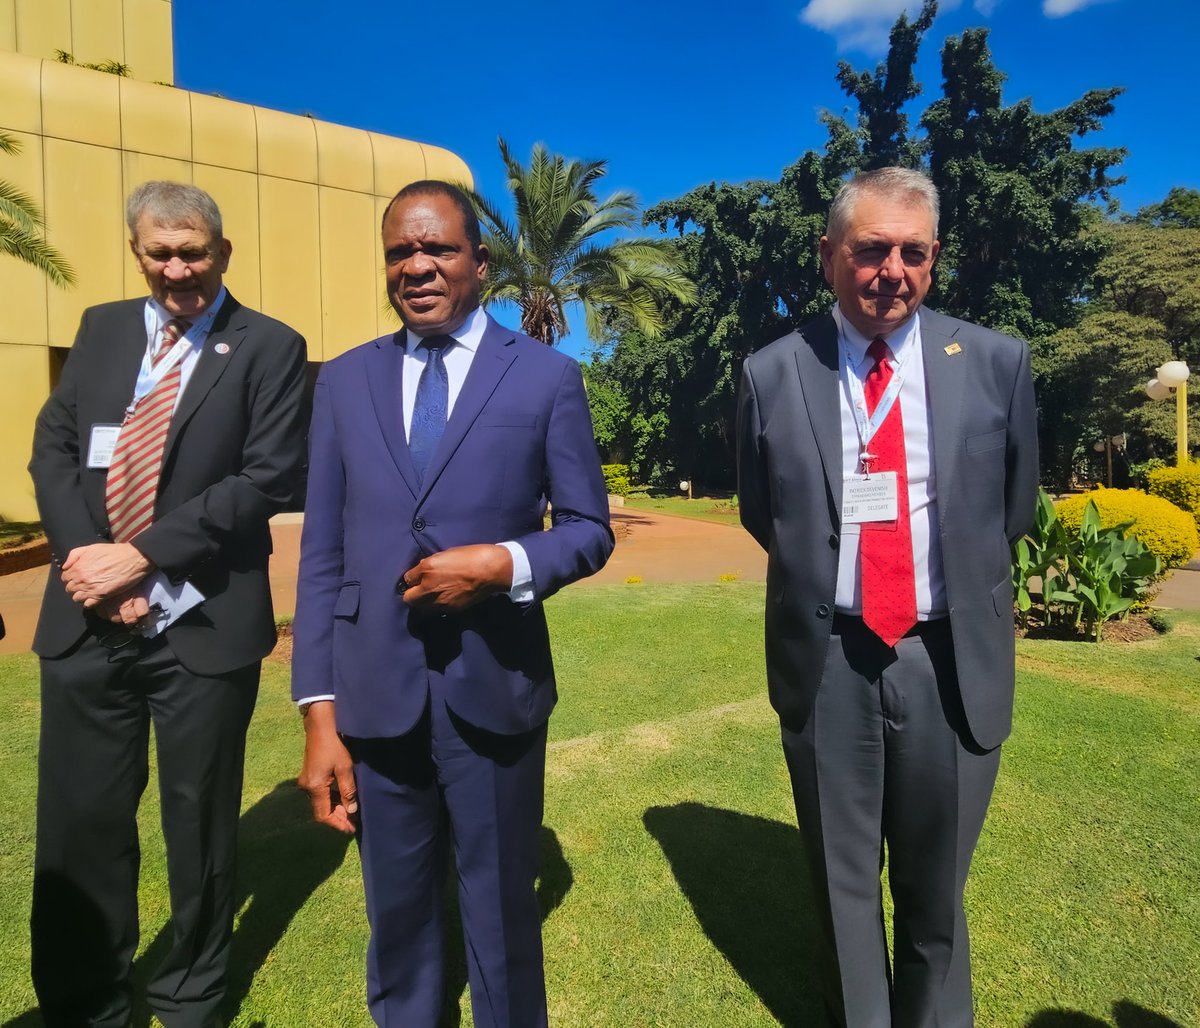 Hon Minister, Dr. A.J. Masuka officially opened the World Tobacco Africa Expo at Rainbow Towers in Harare today. The expo brought together key stakeholders to foster collaboration and knowledge exchange.